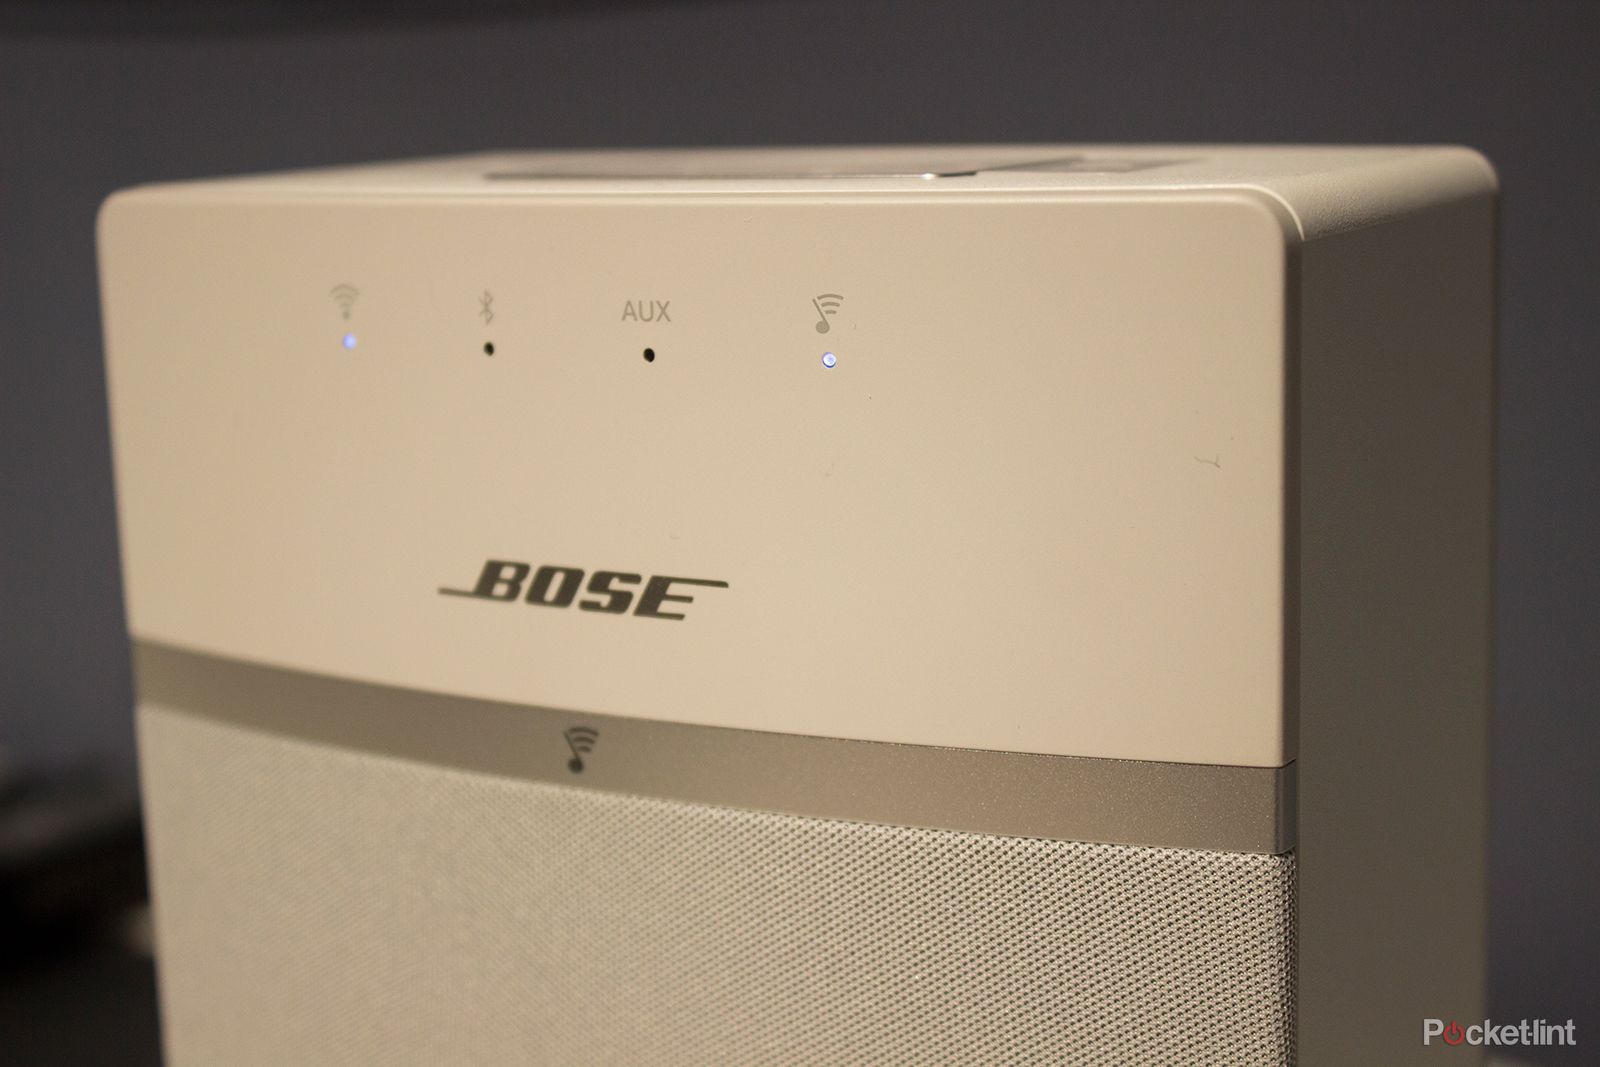 bose aims at sonos with soundtouch 10 speaker adds bluetooth and wi fi to next gen multi room speakers image 1